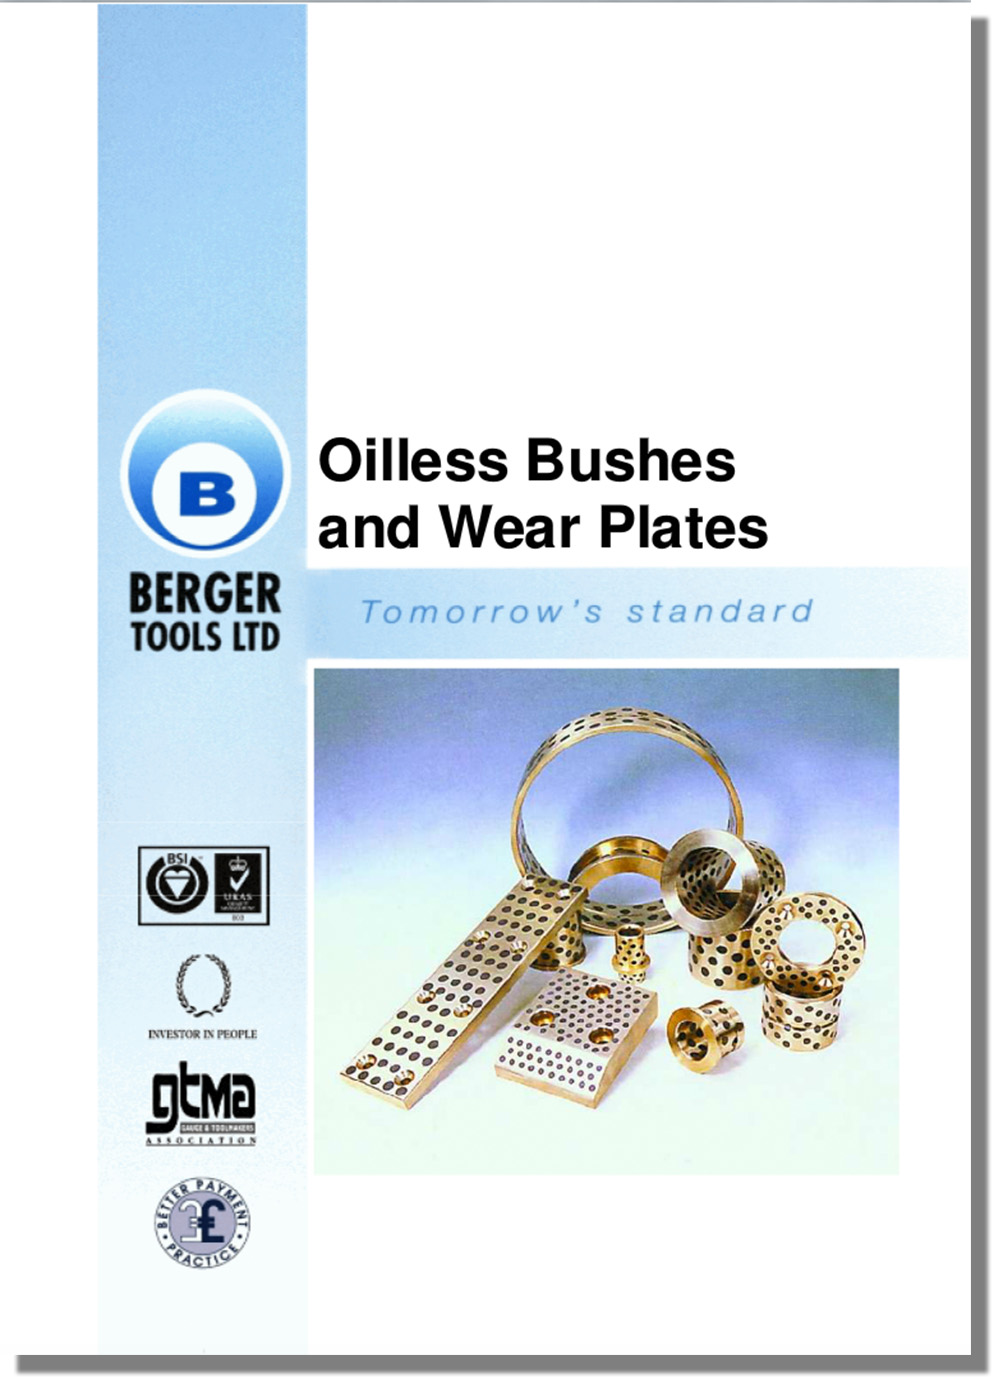 images/original/Oilless_Bushes_and_Wear_Plates_Catalogue_IMAGE_W.jpg